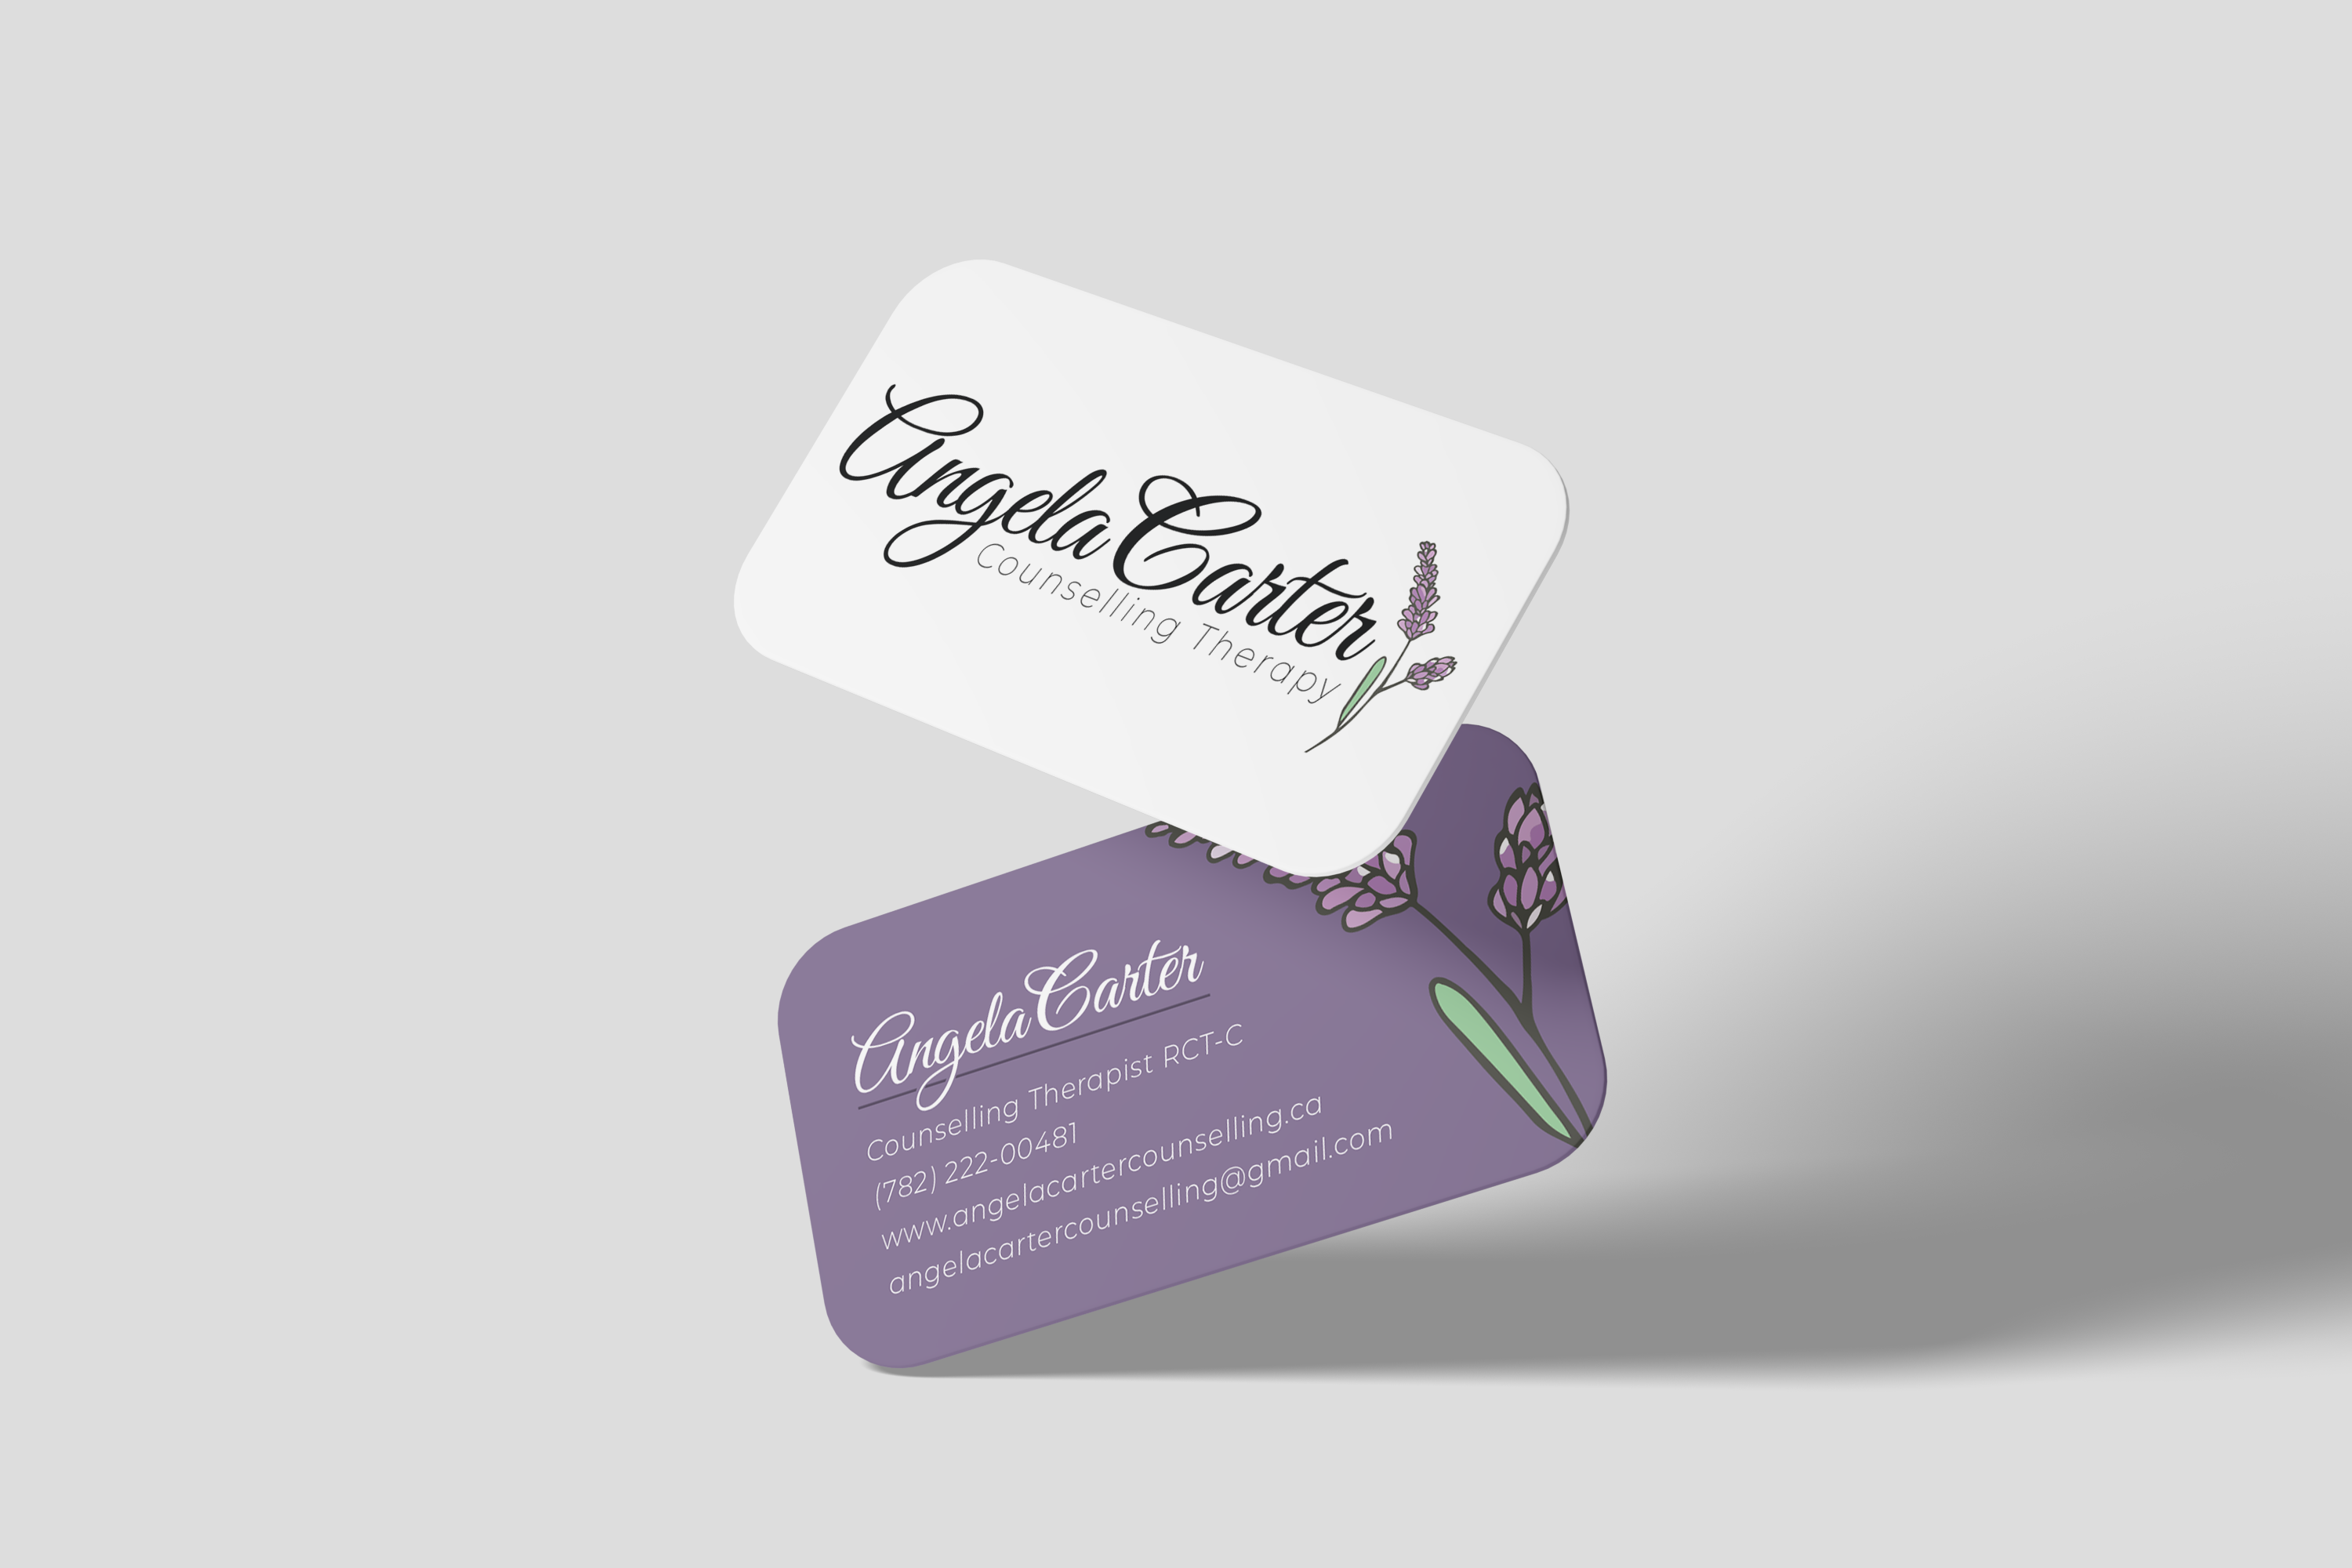 Angela Carter Counselling Therapy Logo and Business Card Design 3